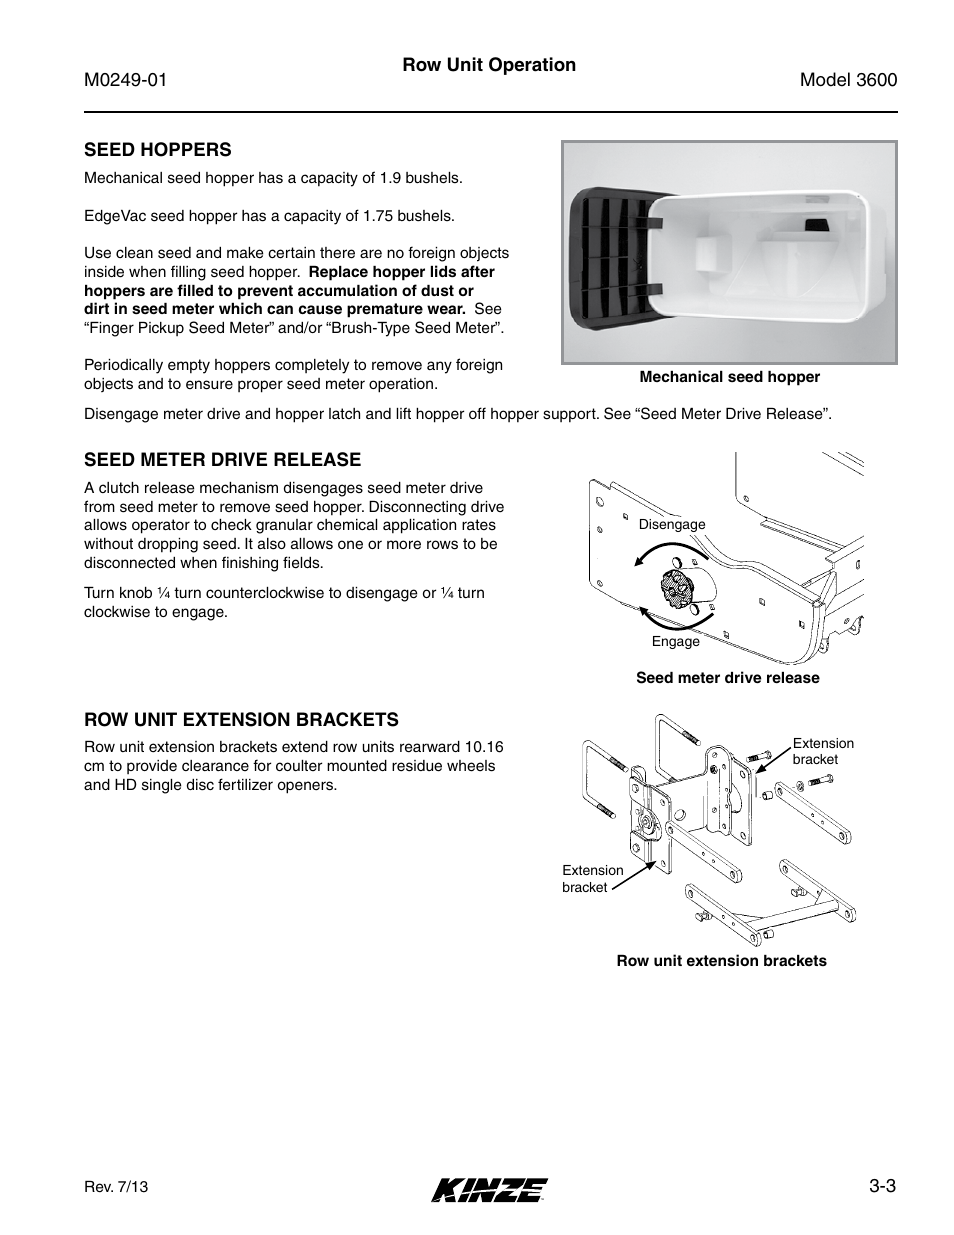 Seed hoppers, Seed meter drive release, Row unit extension brackets | Seed hoppers -3, Seed meter drive release -3, Row unit extension brackets -3 | Kinze 3600 Lift and Rotate Planter (70 CM) Rev. 5/14 User Manual | Page 51 / 158